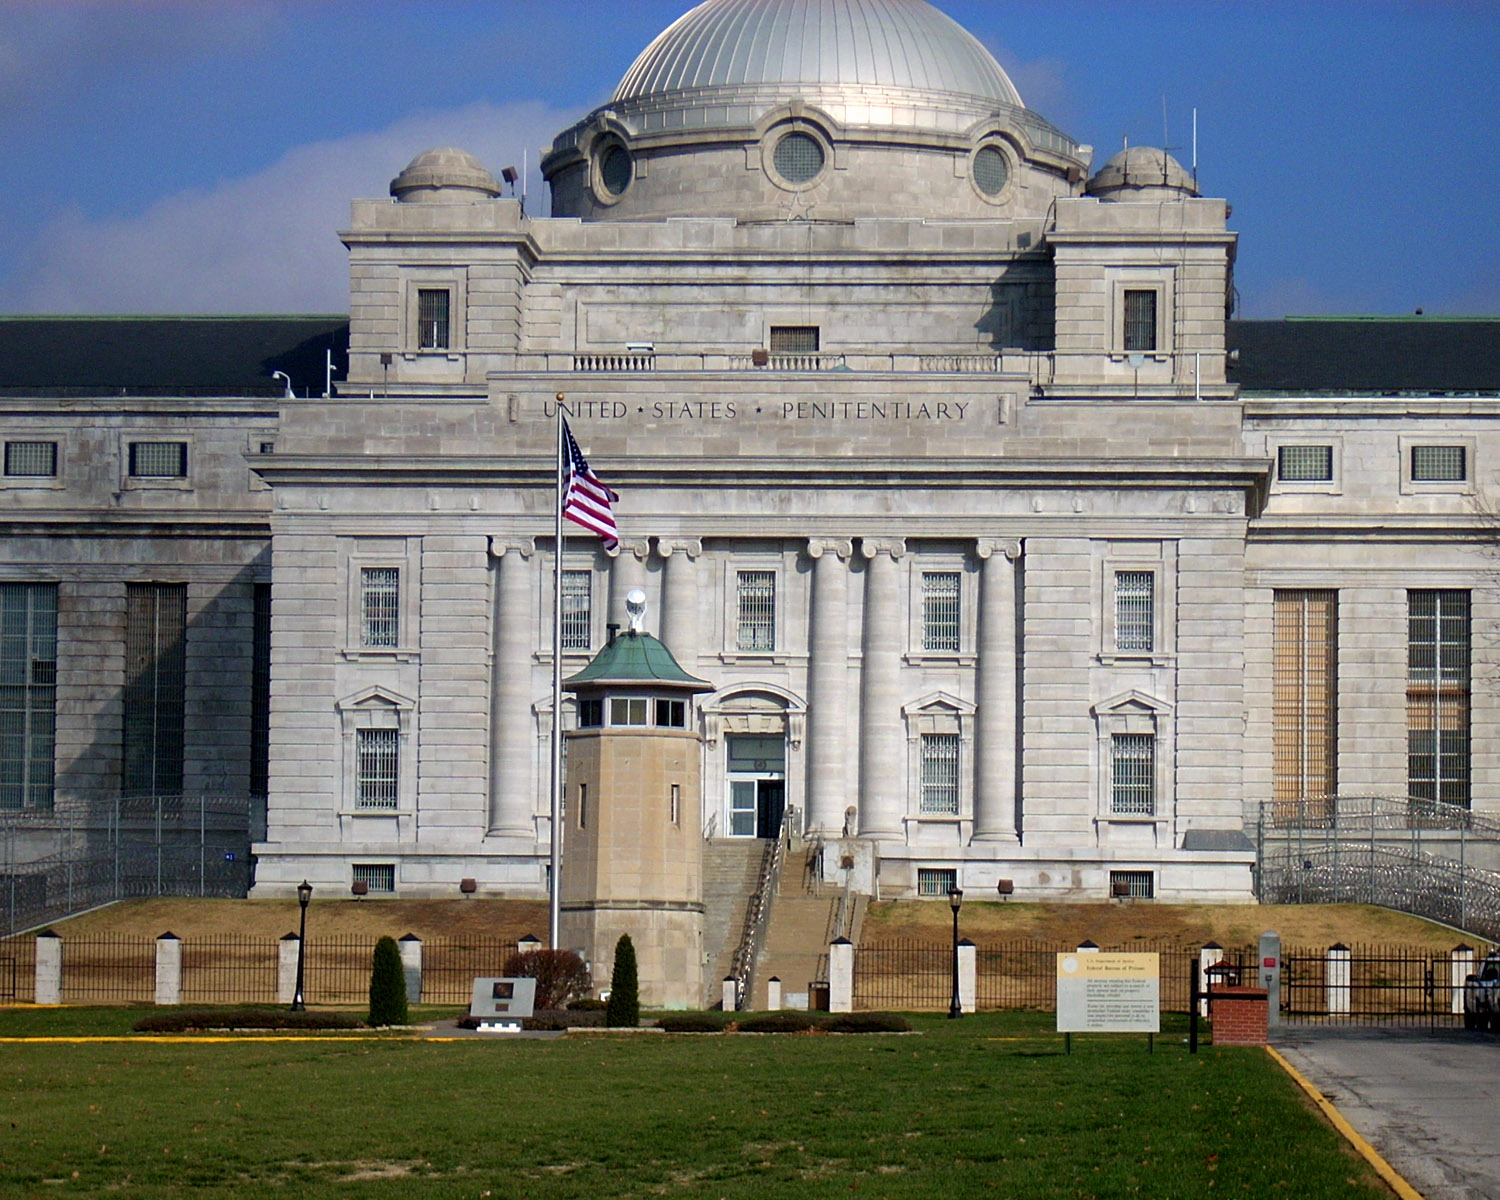 A fancy domed building with a guard tower and American flag in front.